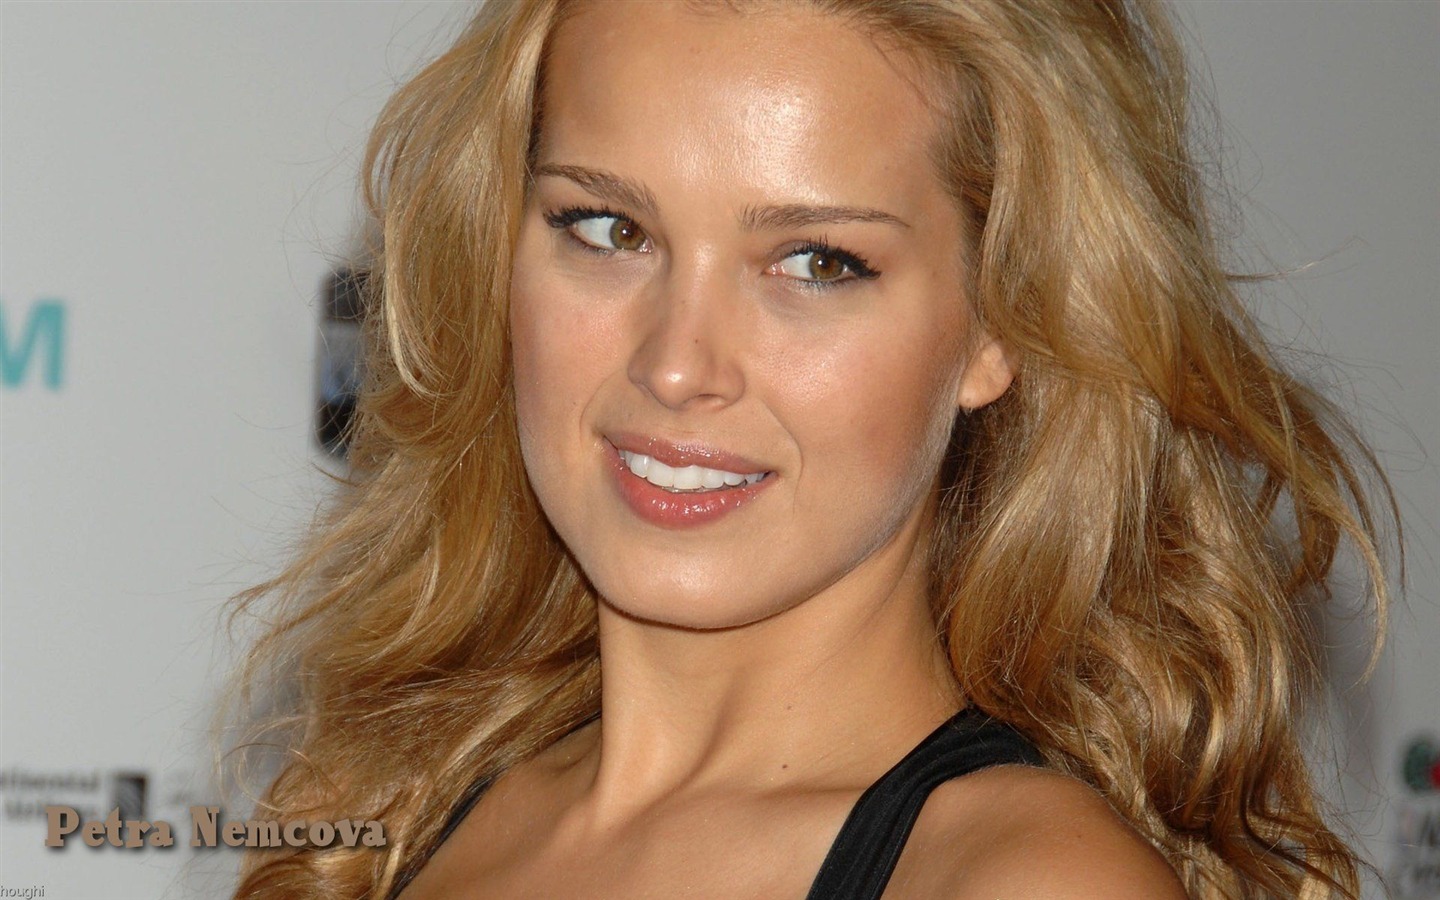 Petra Nemcova #034 - 1440x900 Wallpapers Pictures Photos Images